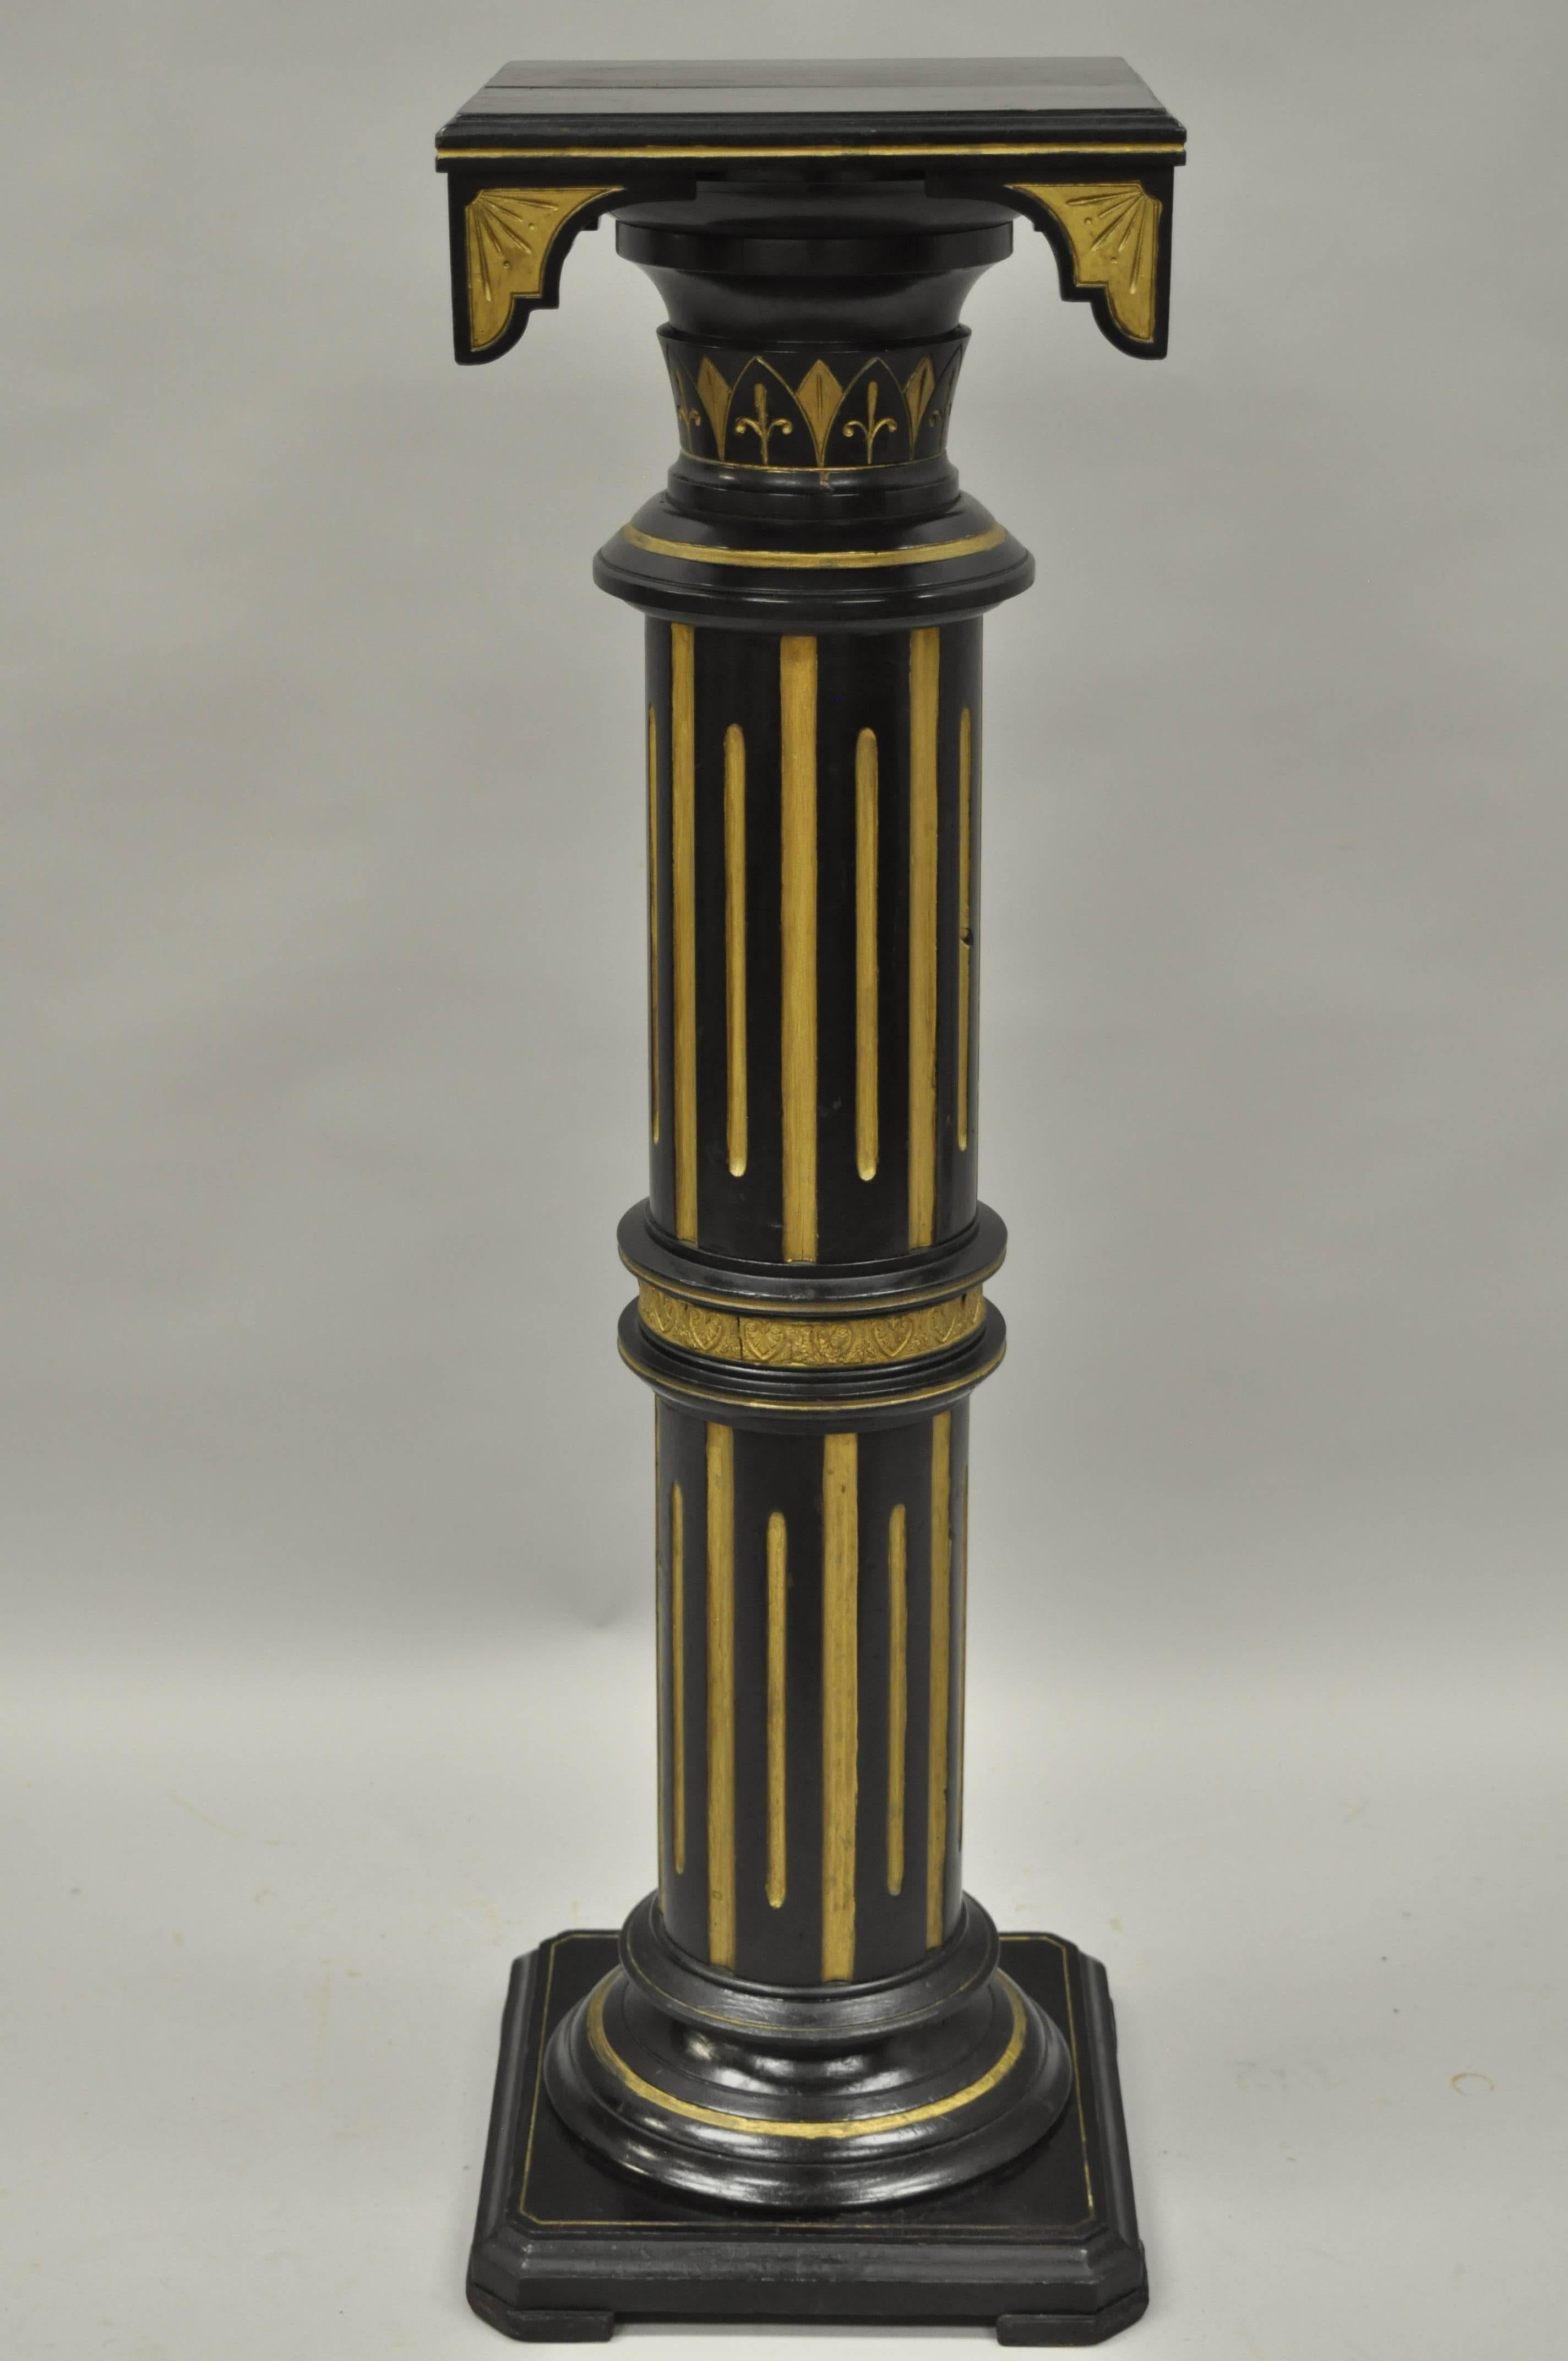 Antique Victorian column-form pedestal plant stand attributed to Herter Brothers. Item features solid wood construction, Black ebonized finish with gold accents, Carved reeded column. Outstanding antique pedestal.